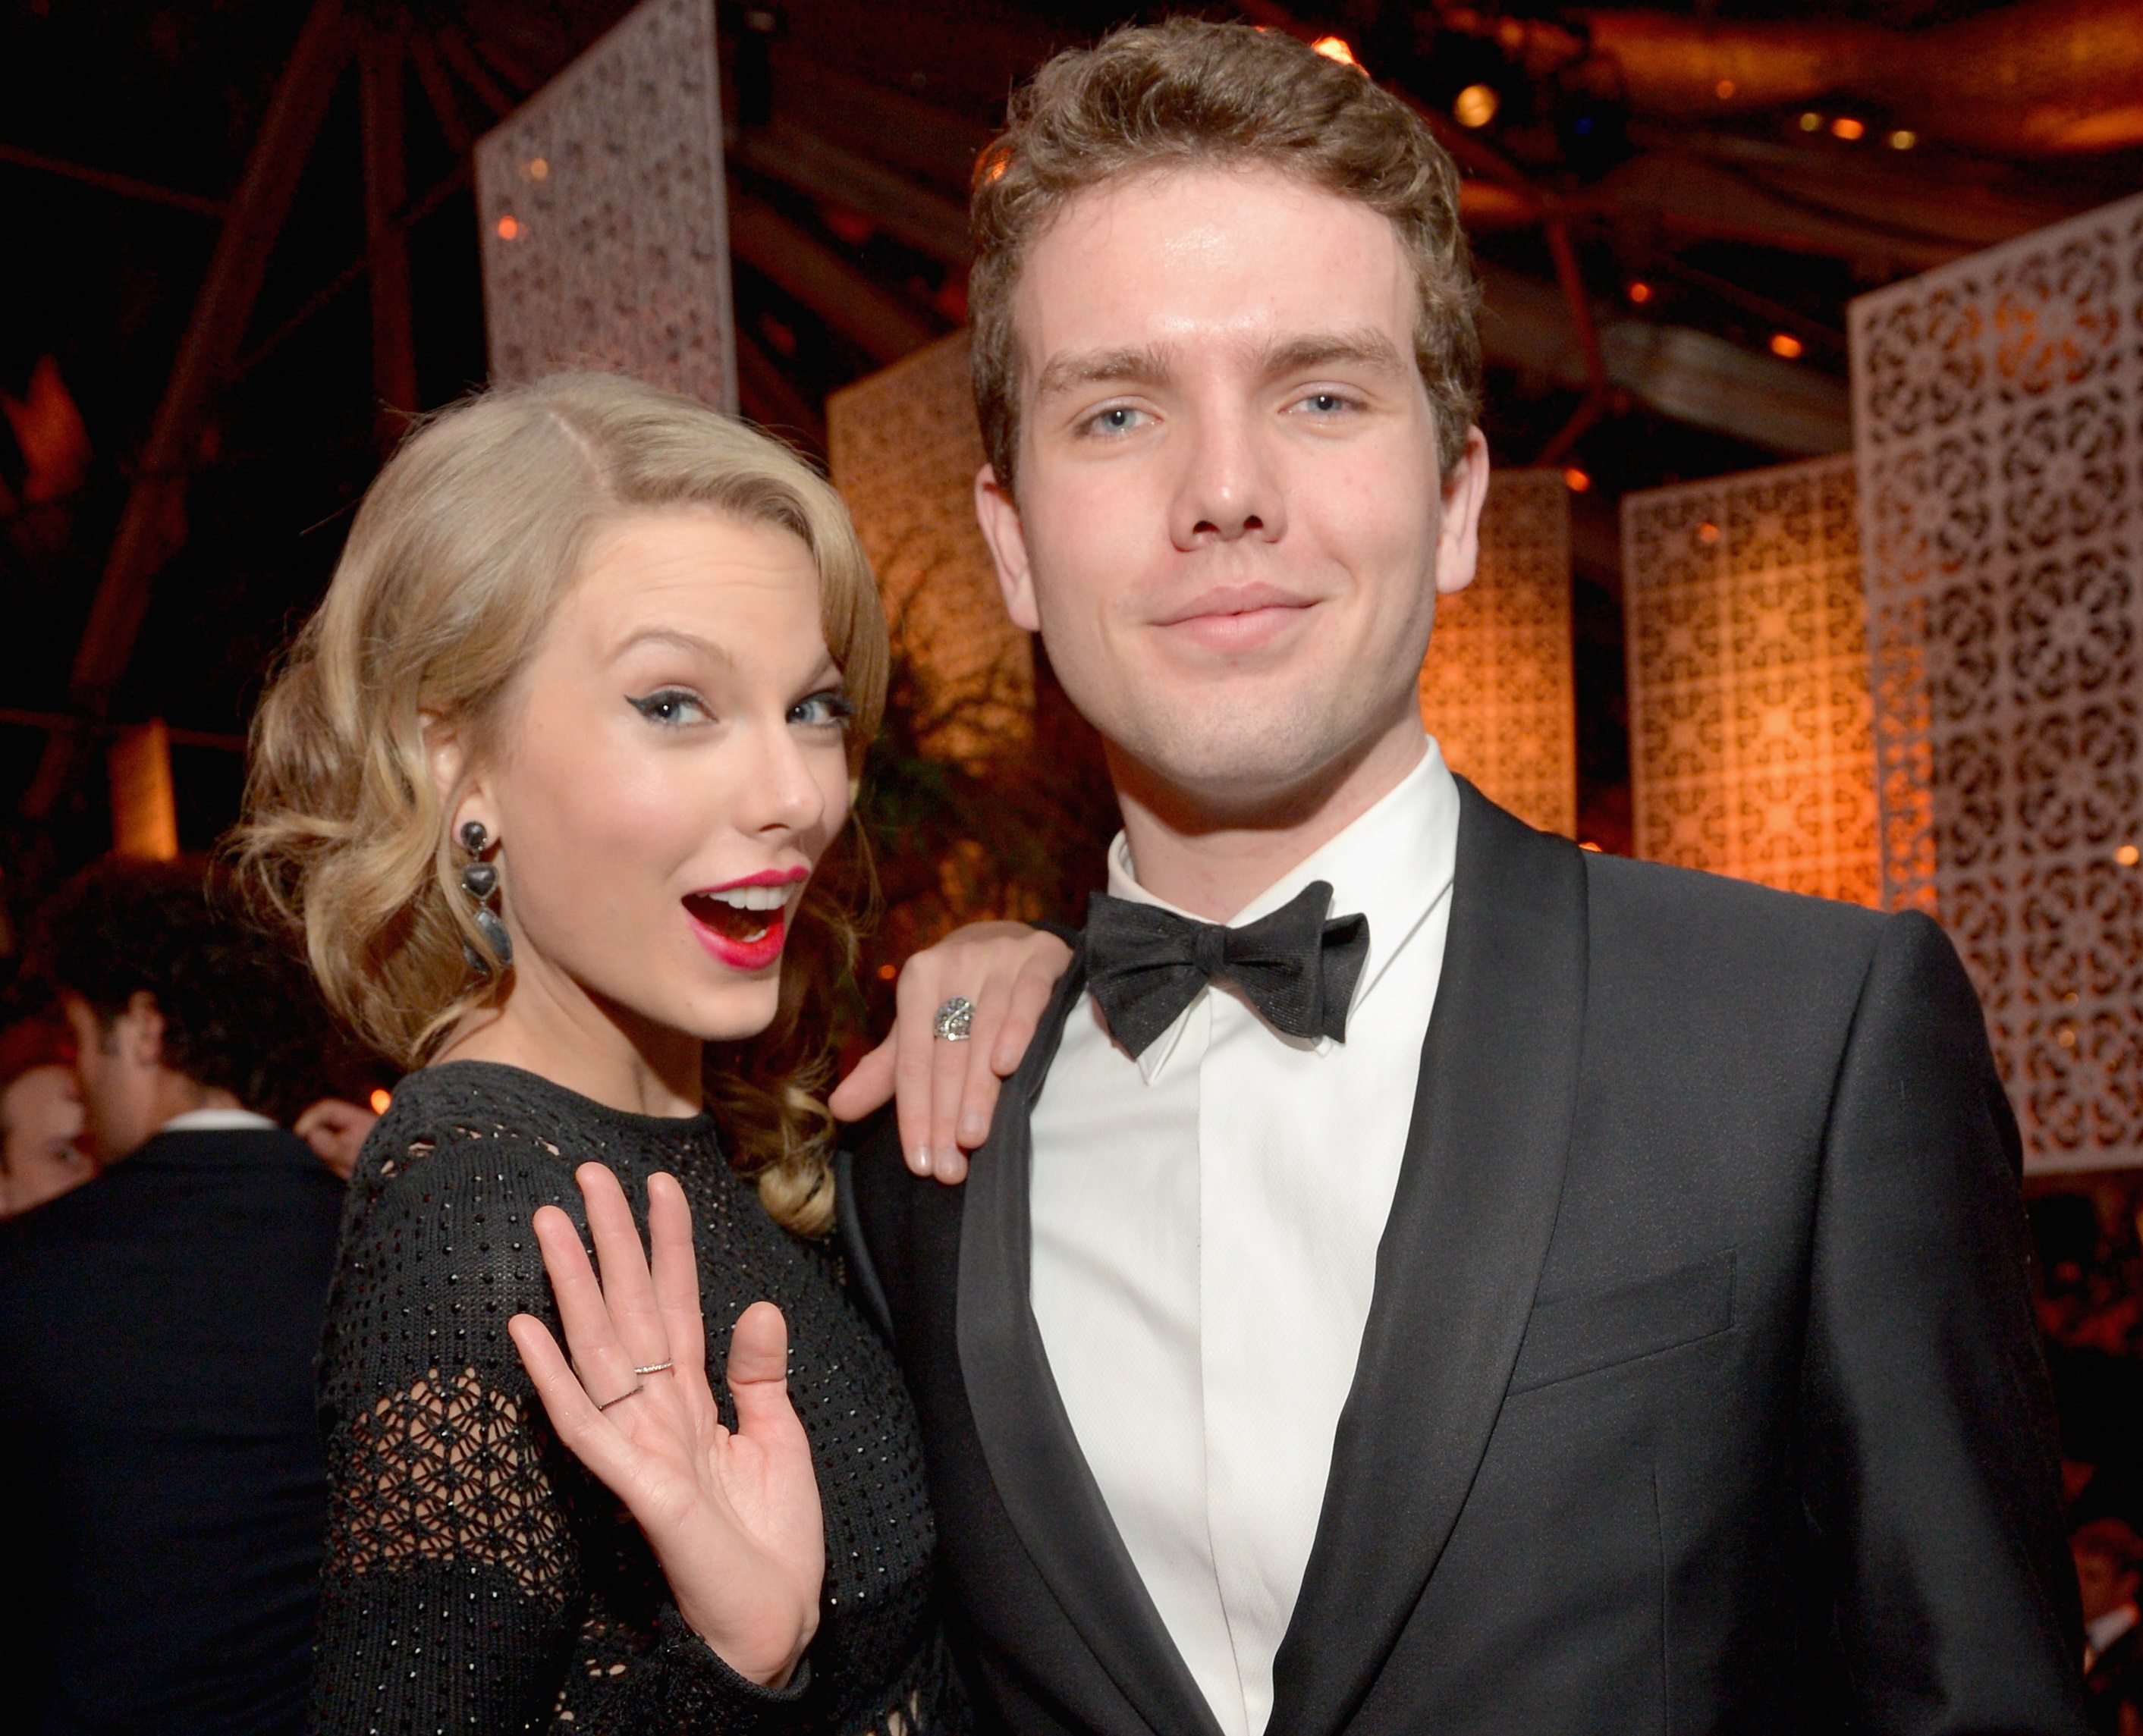 BEVERLY HILLS, CA - JANUARY 12: Singer Taylor Swift (L) and Austin Swift attend The Weinstein Company & Netflix's 2014 Golden Globes After Party presented by Bombardier, FIJI Water, Lexus, Laura Mercier, Marie Claire and Yucaipa Films at The Beverly Hilton Hotel on January 12, 2014 in Beverly Hills, California. (Photo by Charley Gallay/Getty Images for The Weinstein Company)